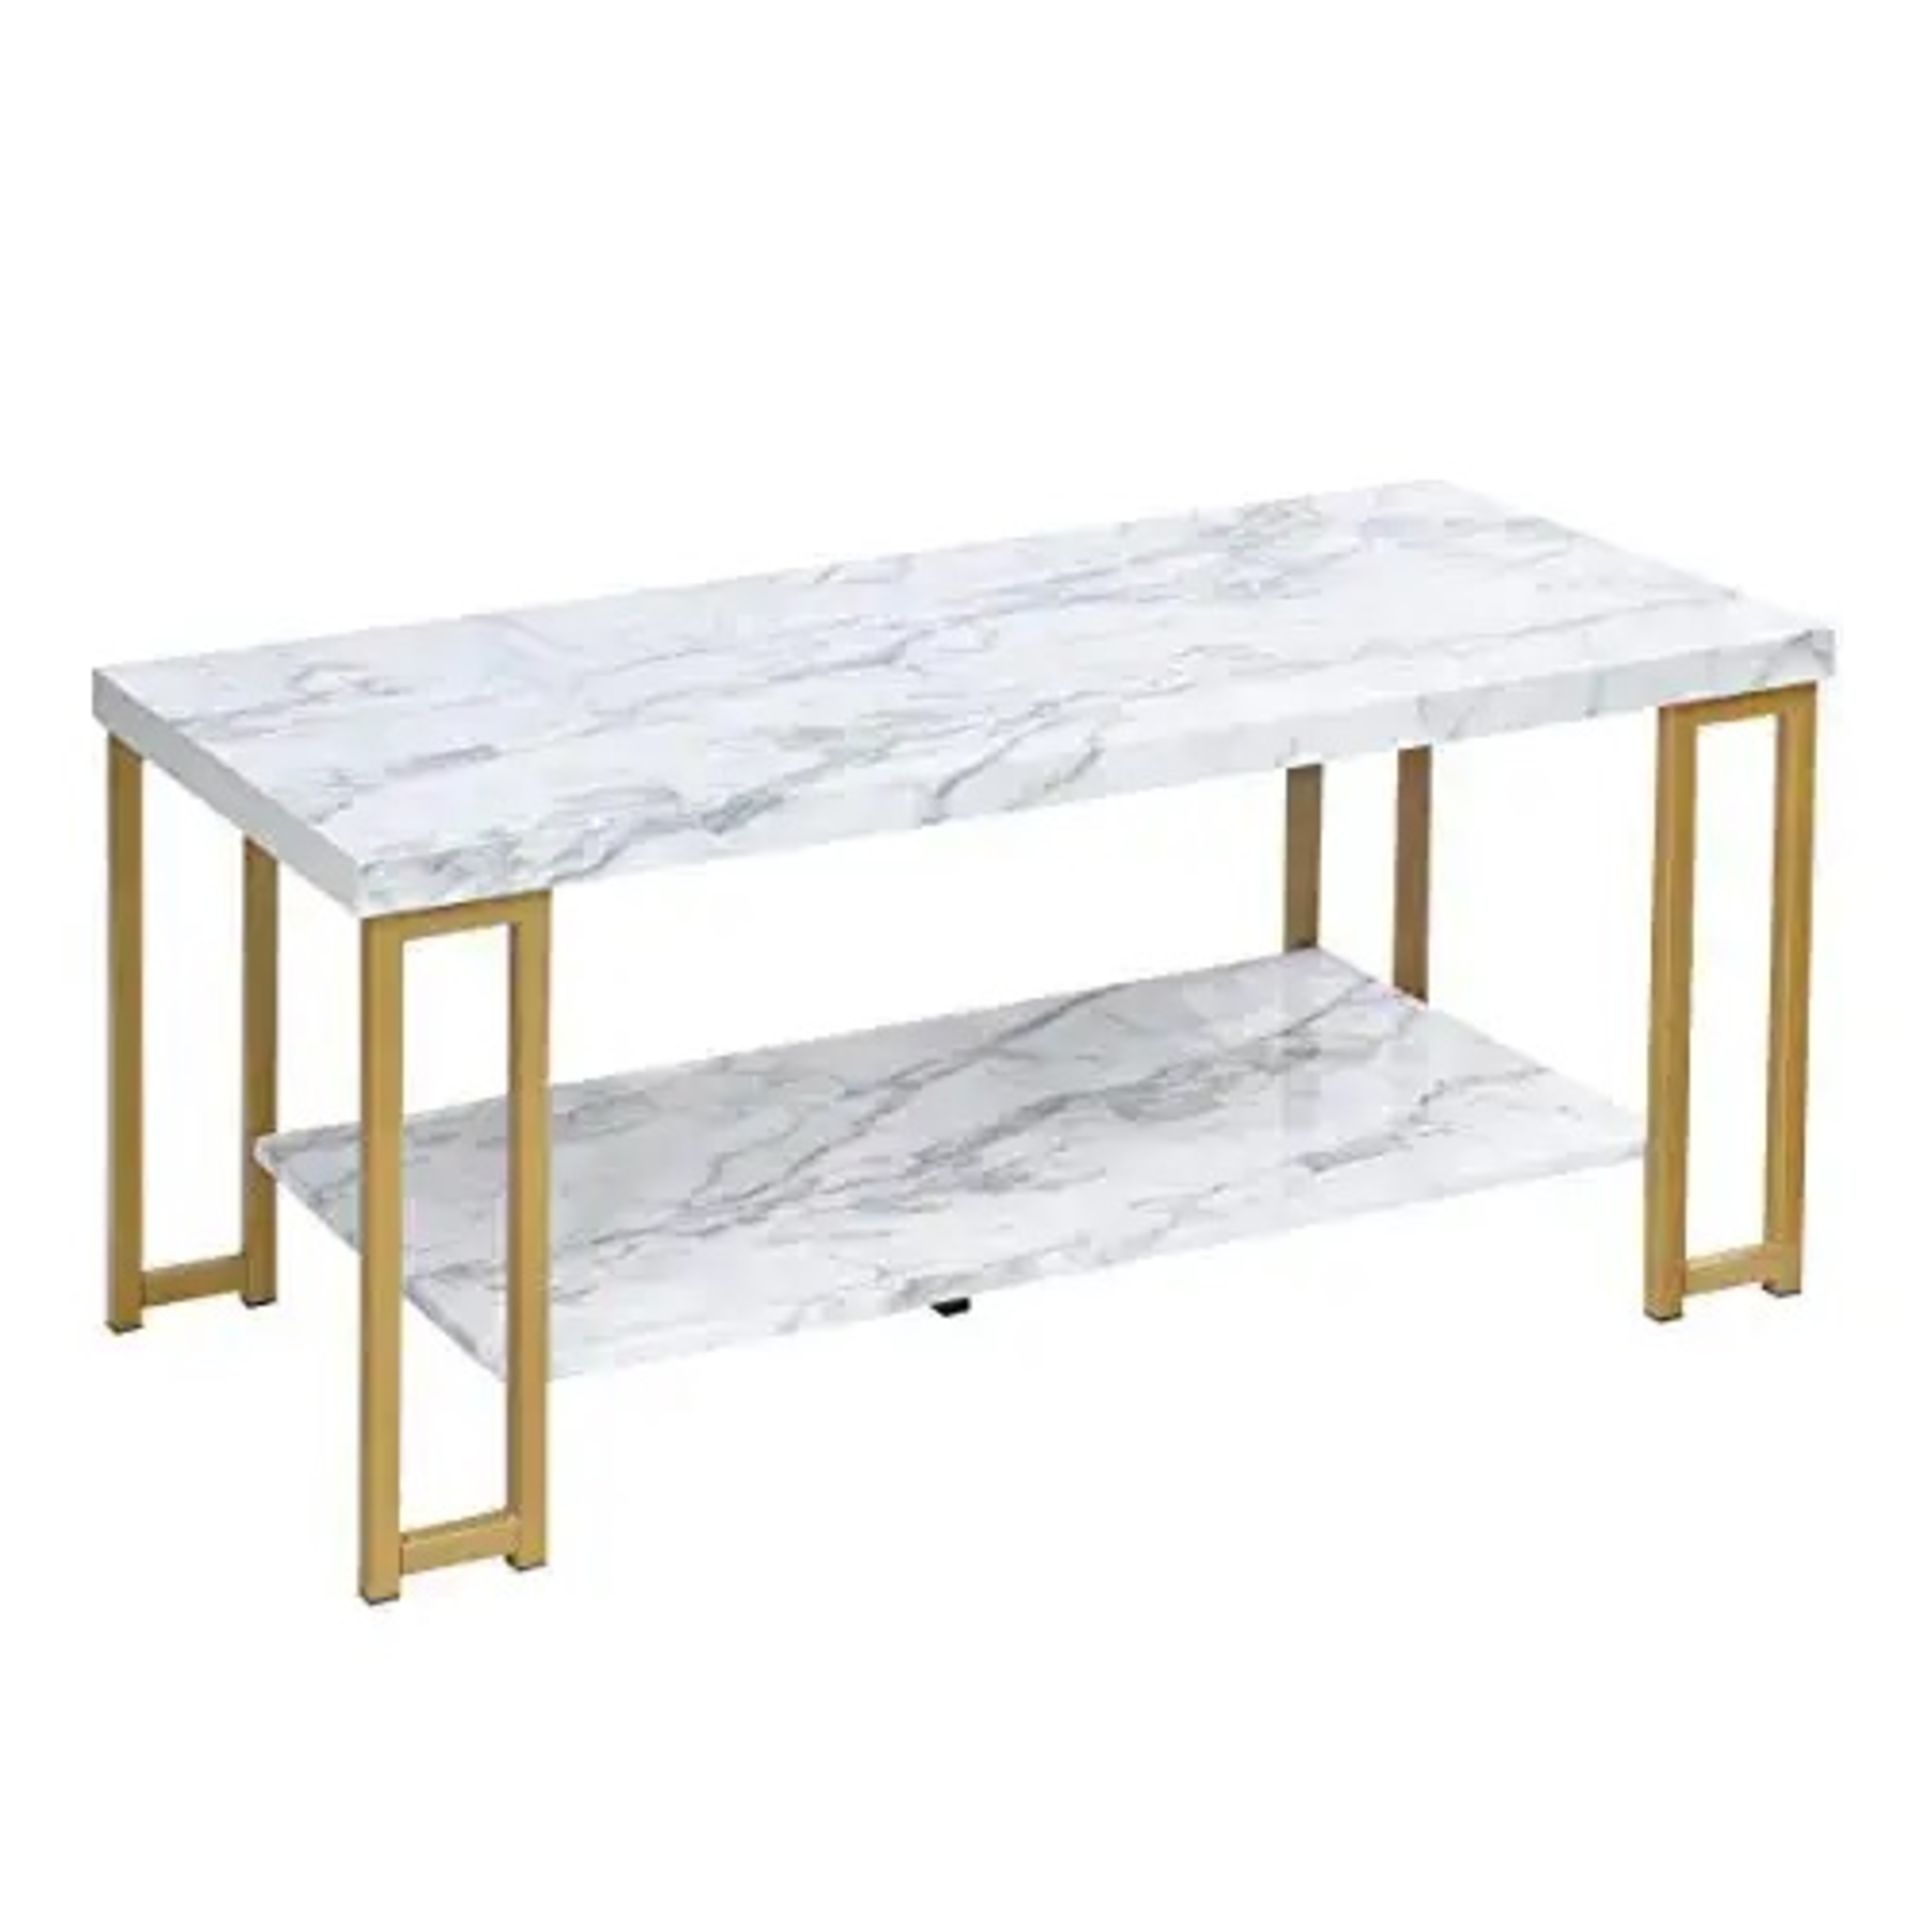 2 Tier Coffee Table, Marble Effect Cocktail Center Table with Storage Shelf, Golden Metal Frame